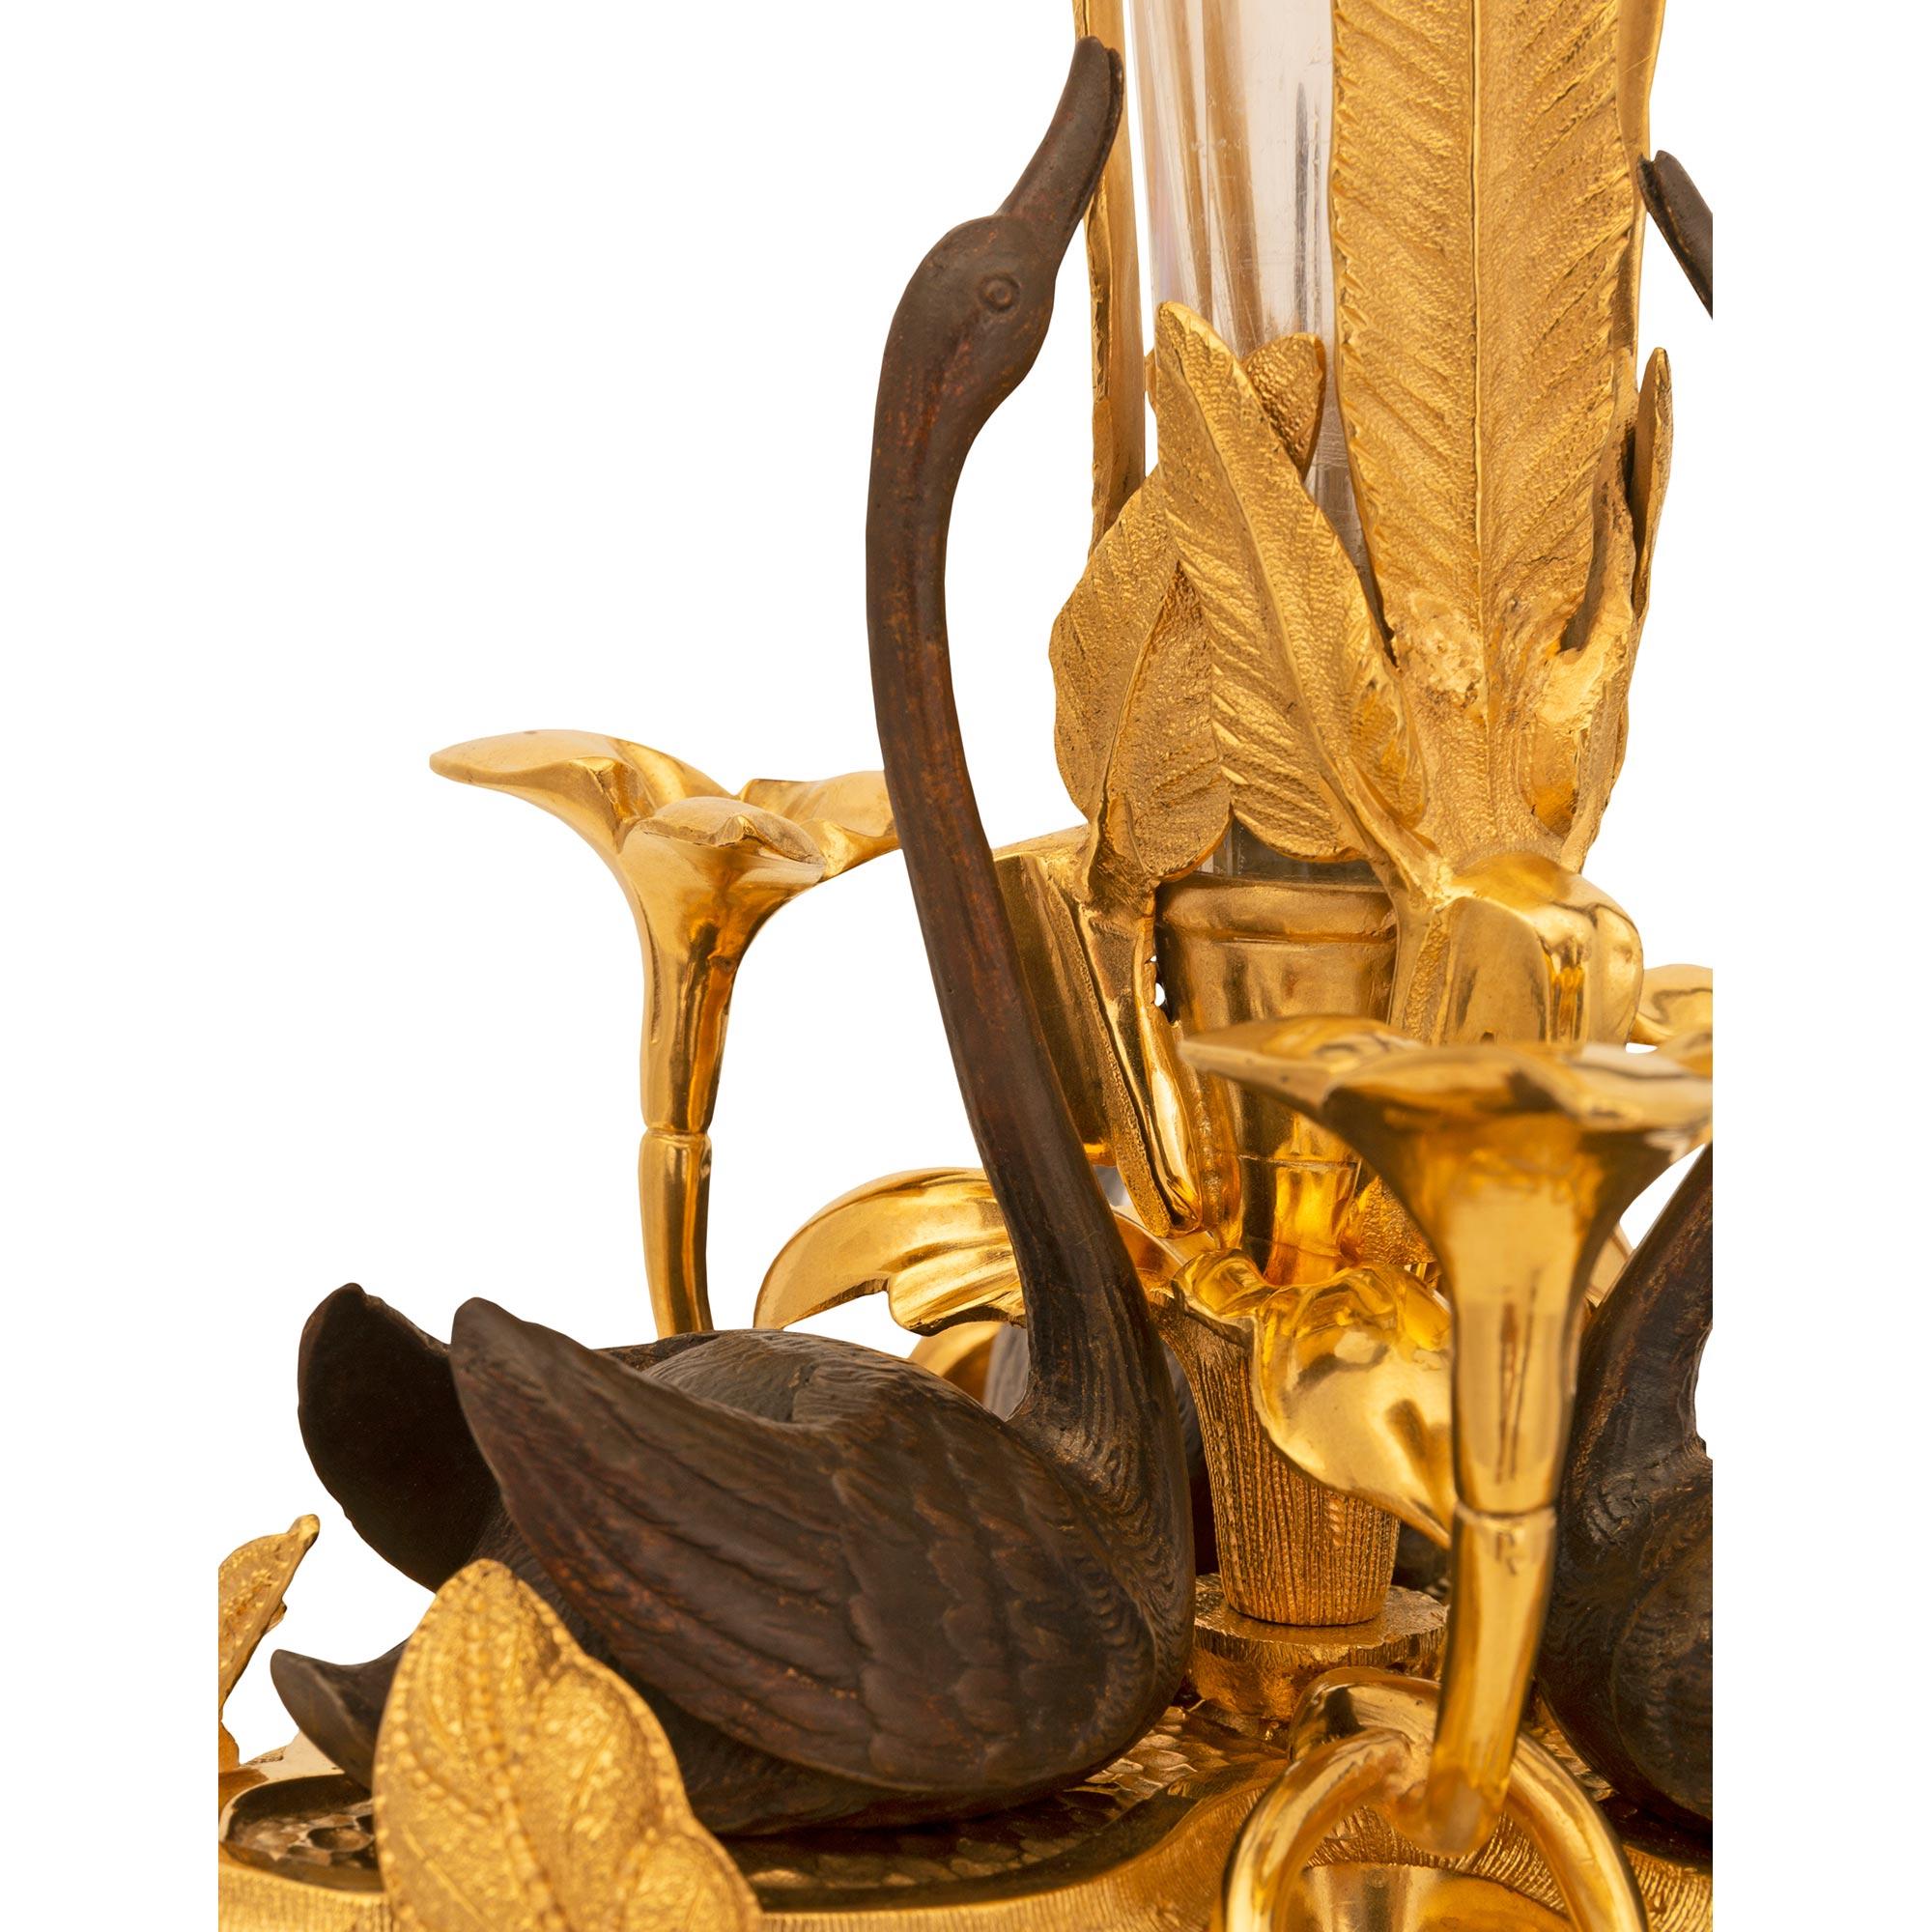 French 19th Century Belle Époque Period Bronze, Crystal, and Ormolu Vase For Sale 3